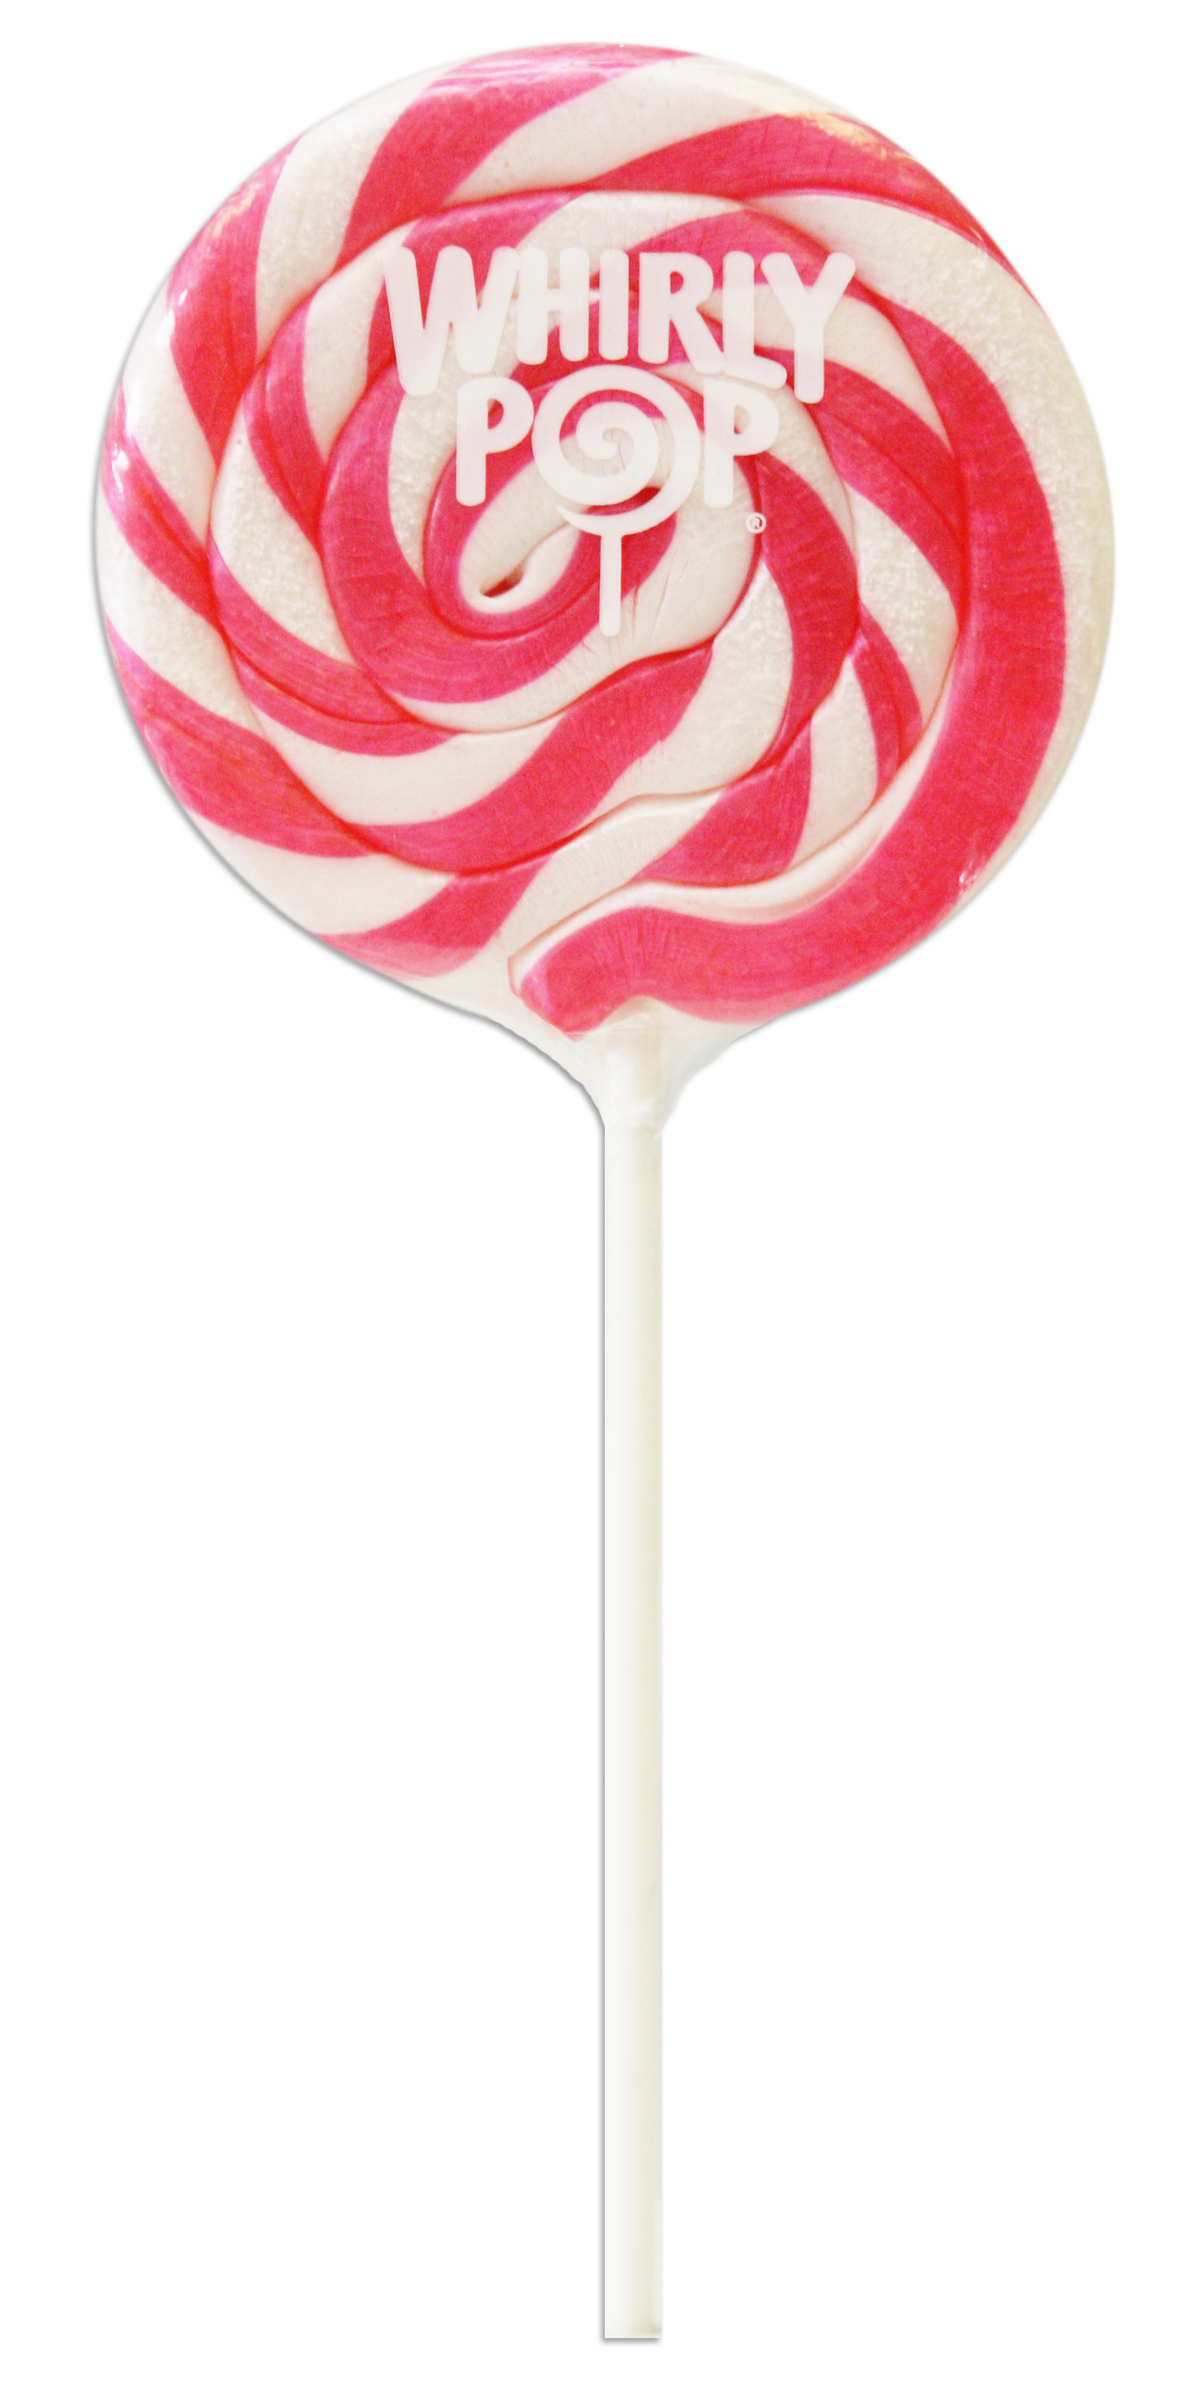 WHIRLY POP PINK